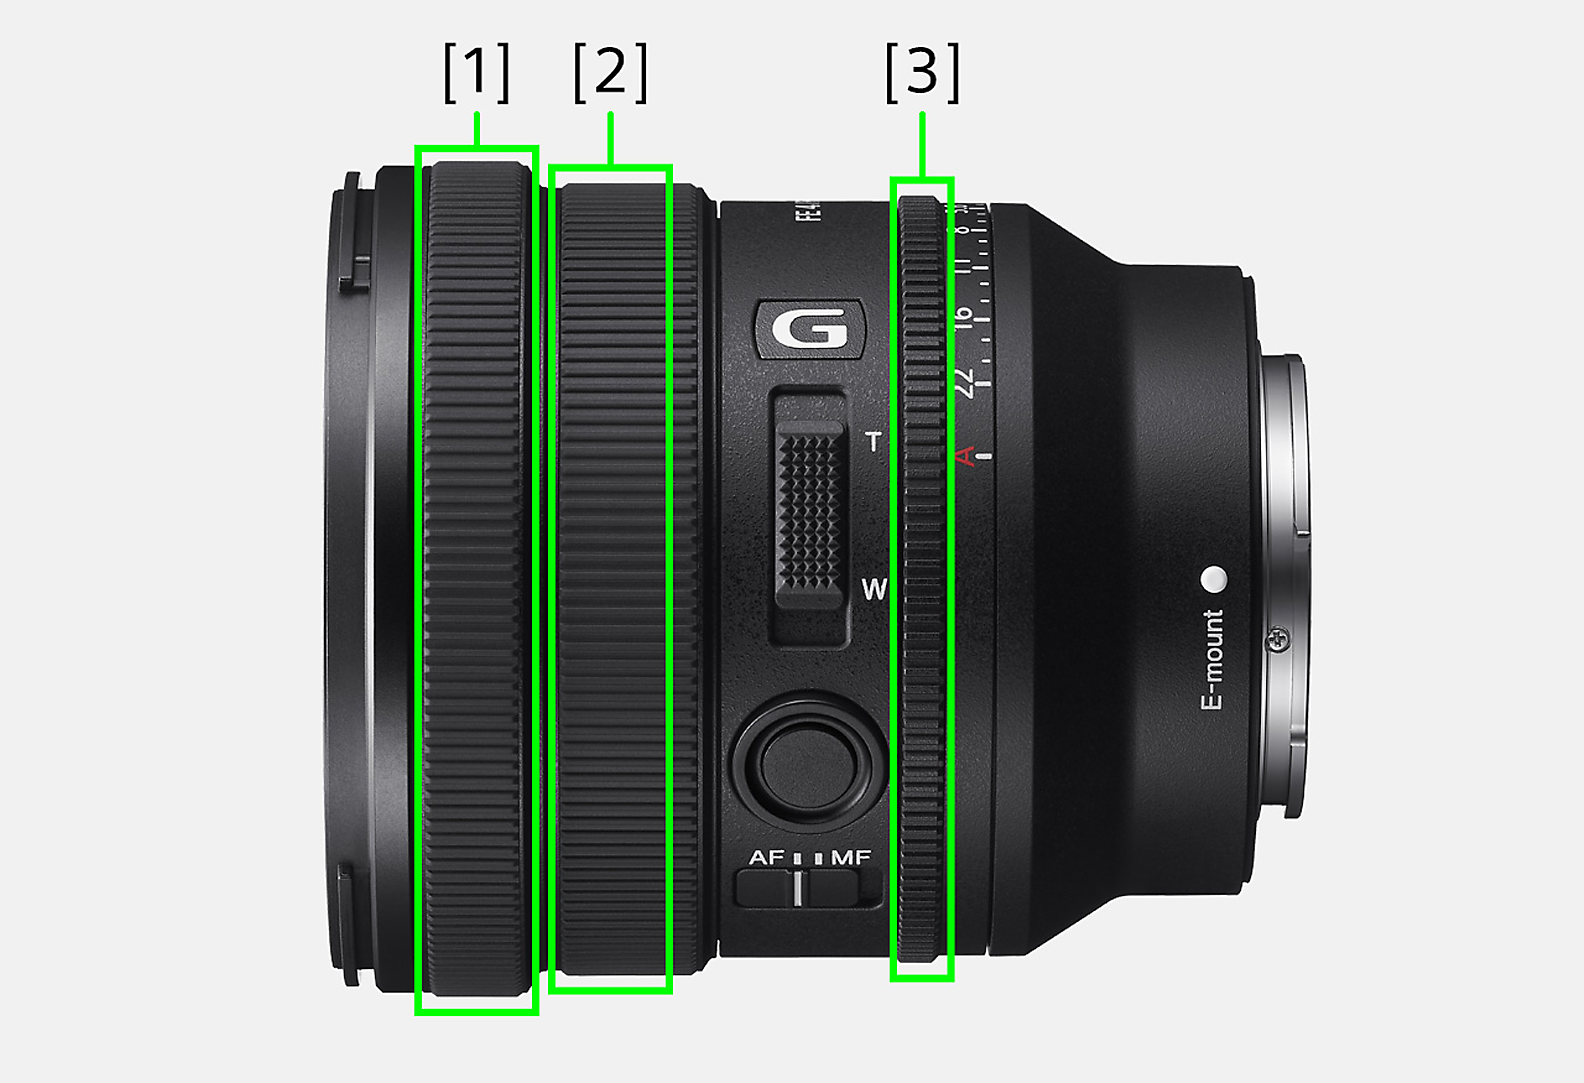 Product image showing Focusing ring, Zoom ring, and Aperture ring